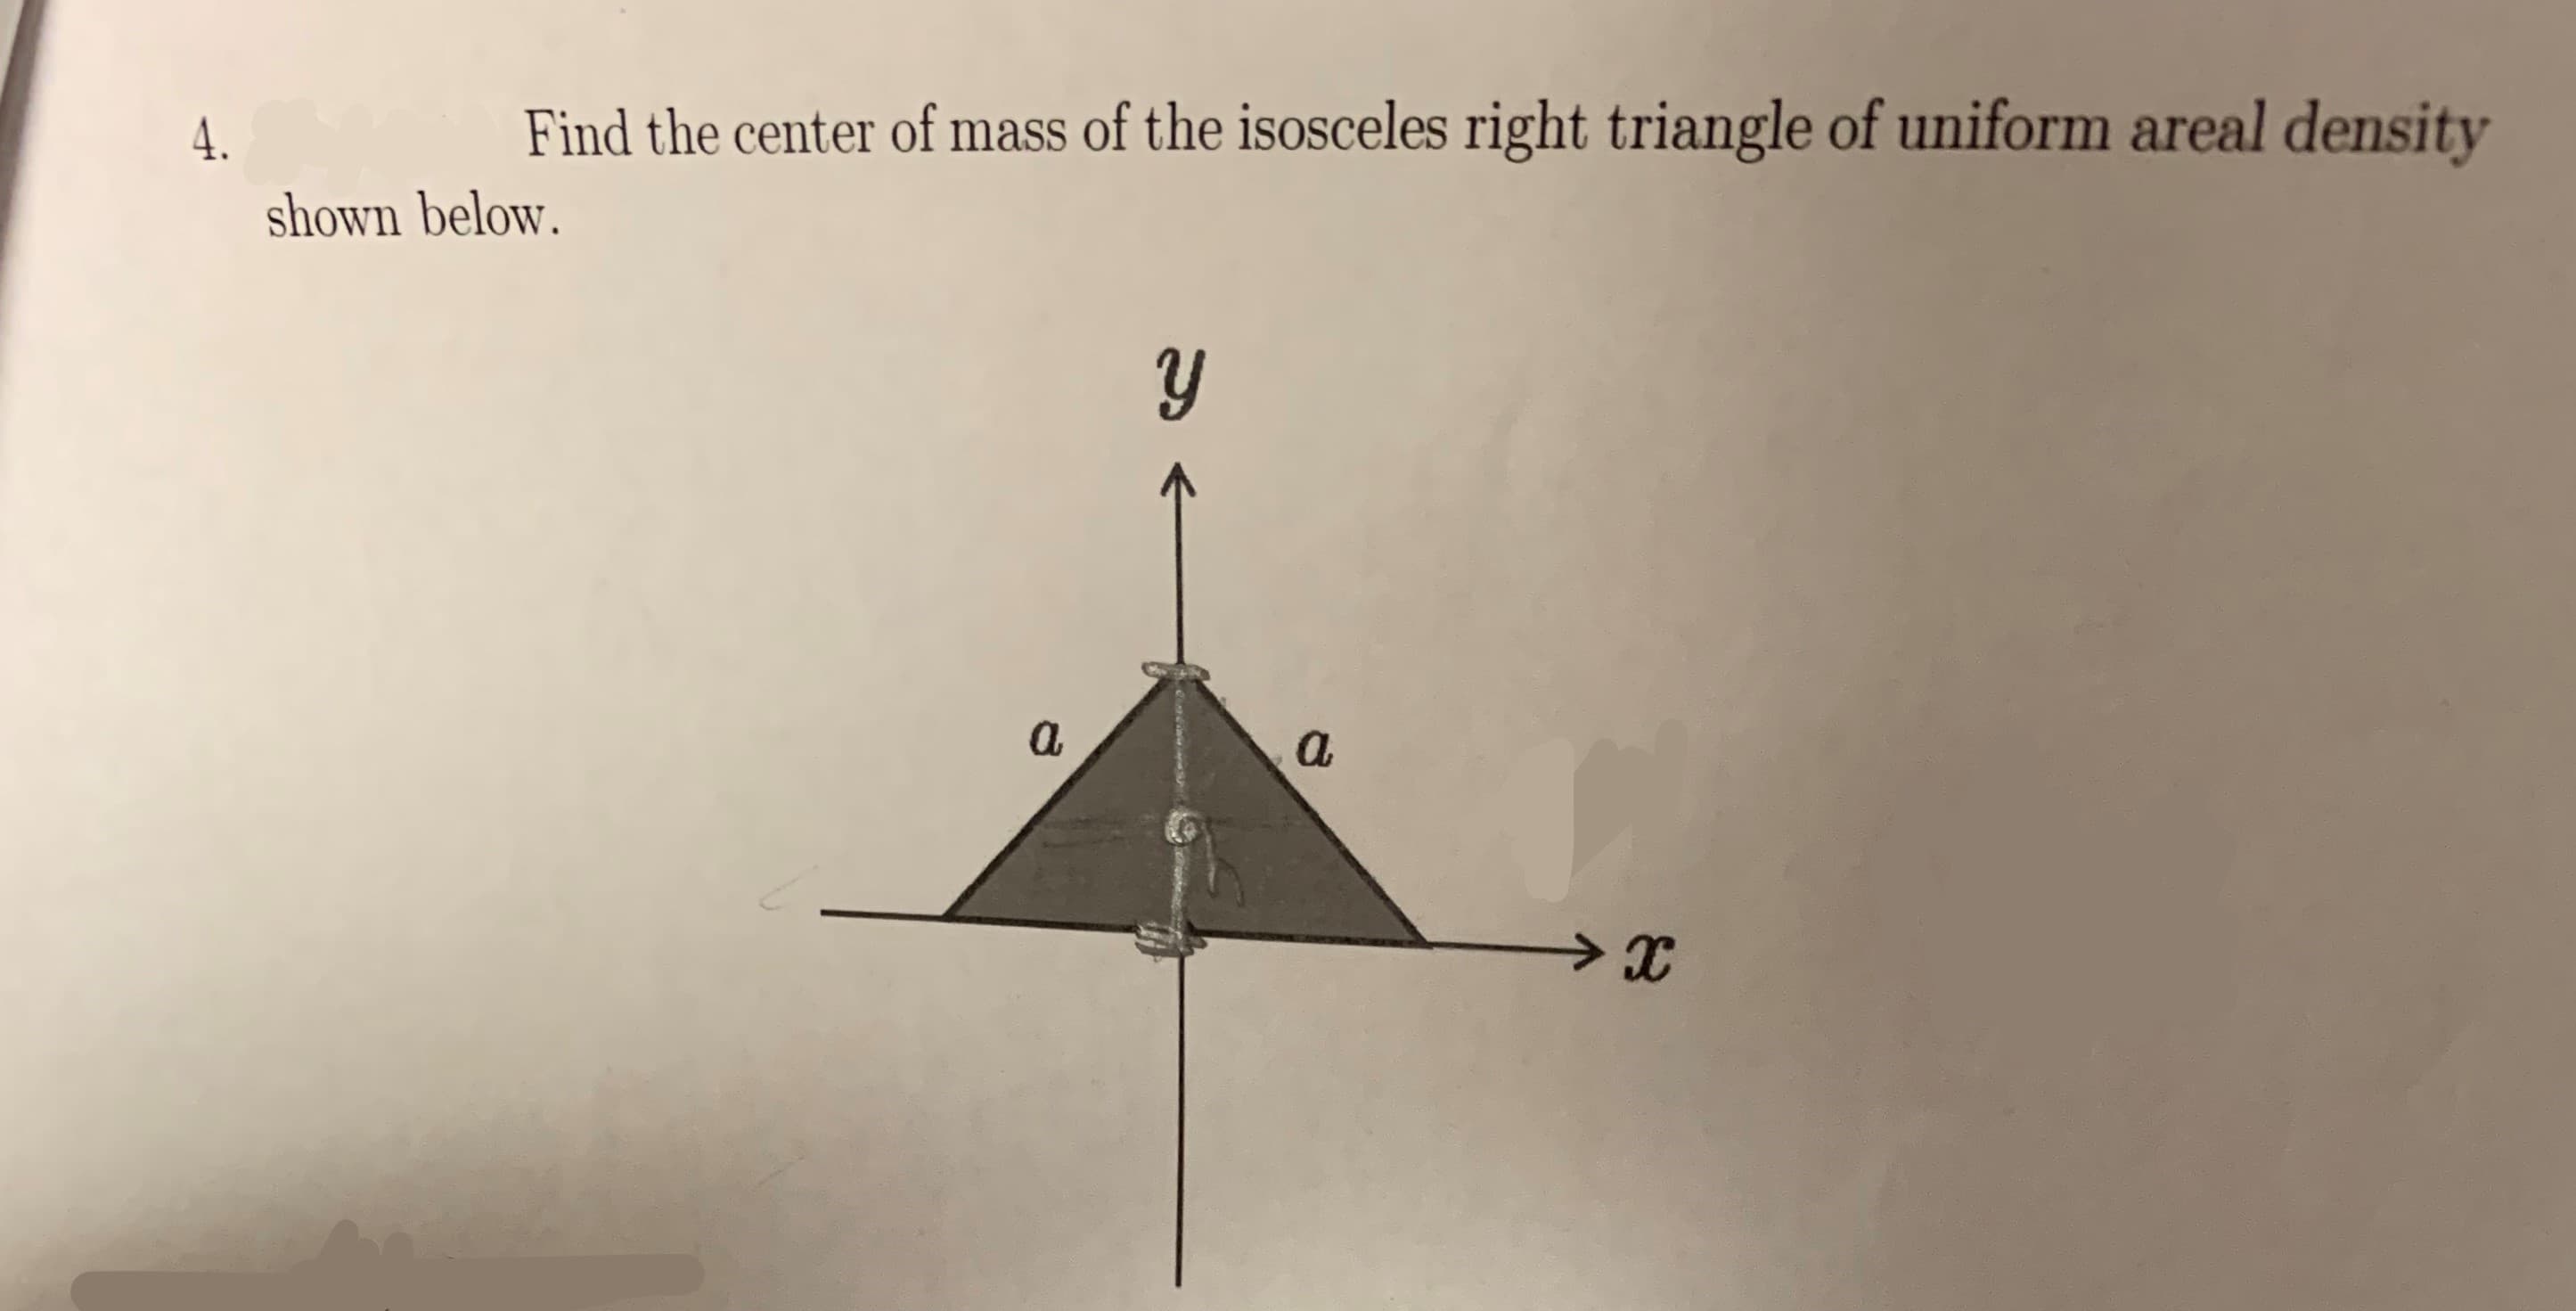 Find the center of mass of the isosceles right triangle of uniform areal density
4.
shown below.
y
а
а
>X
